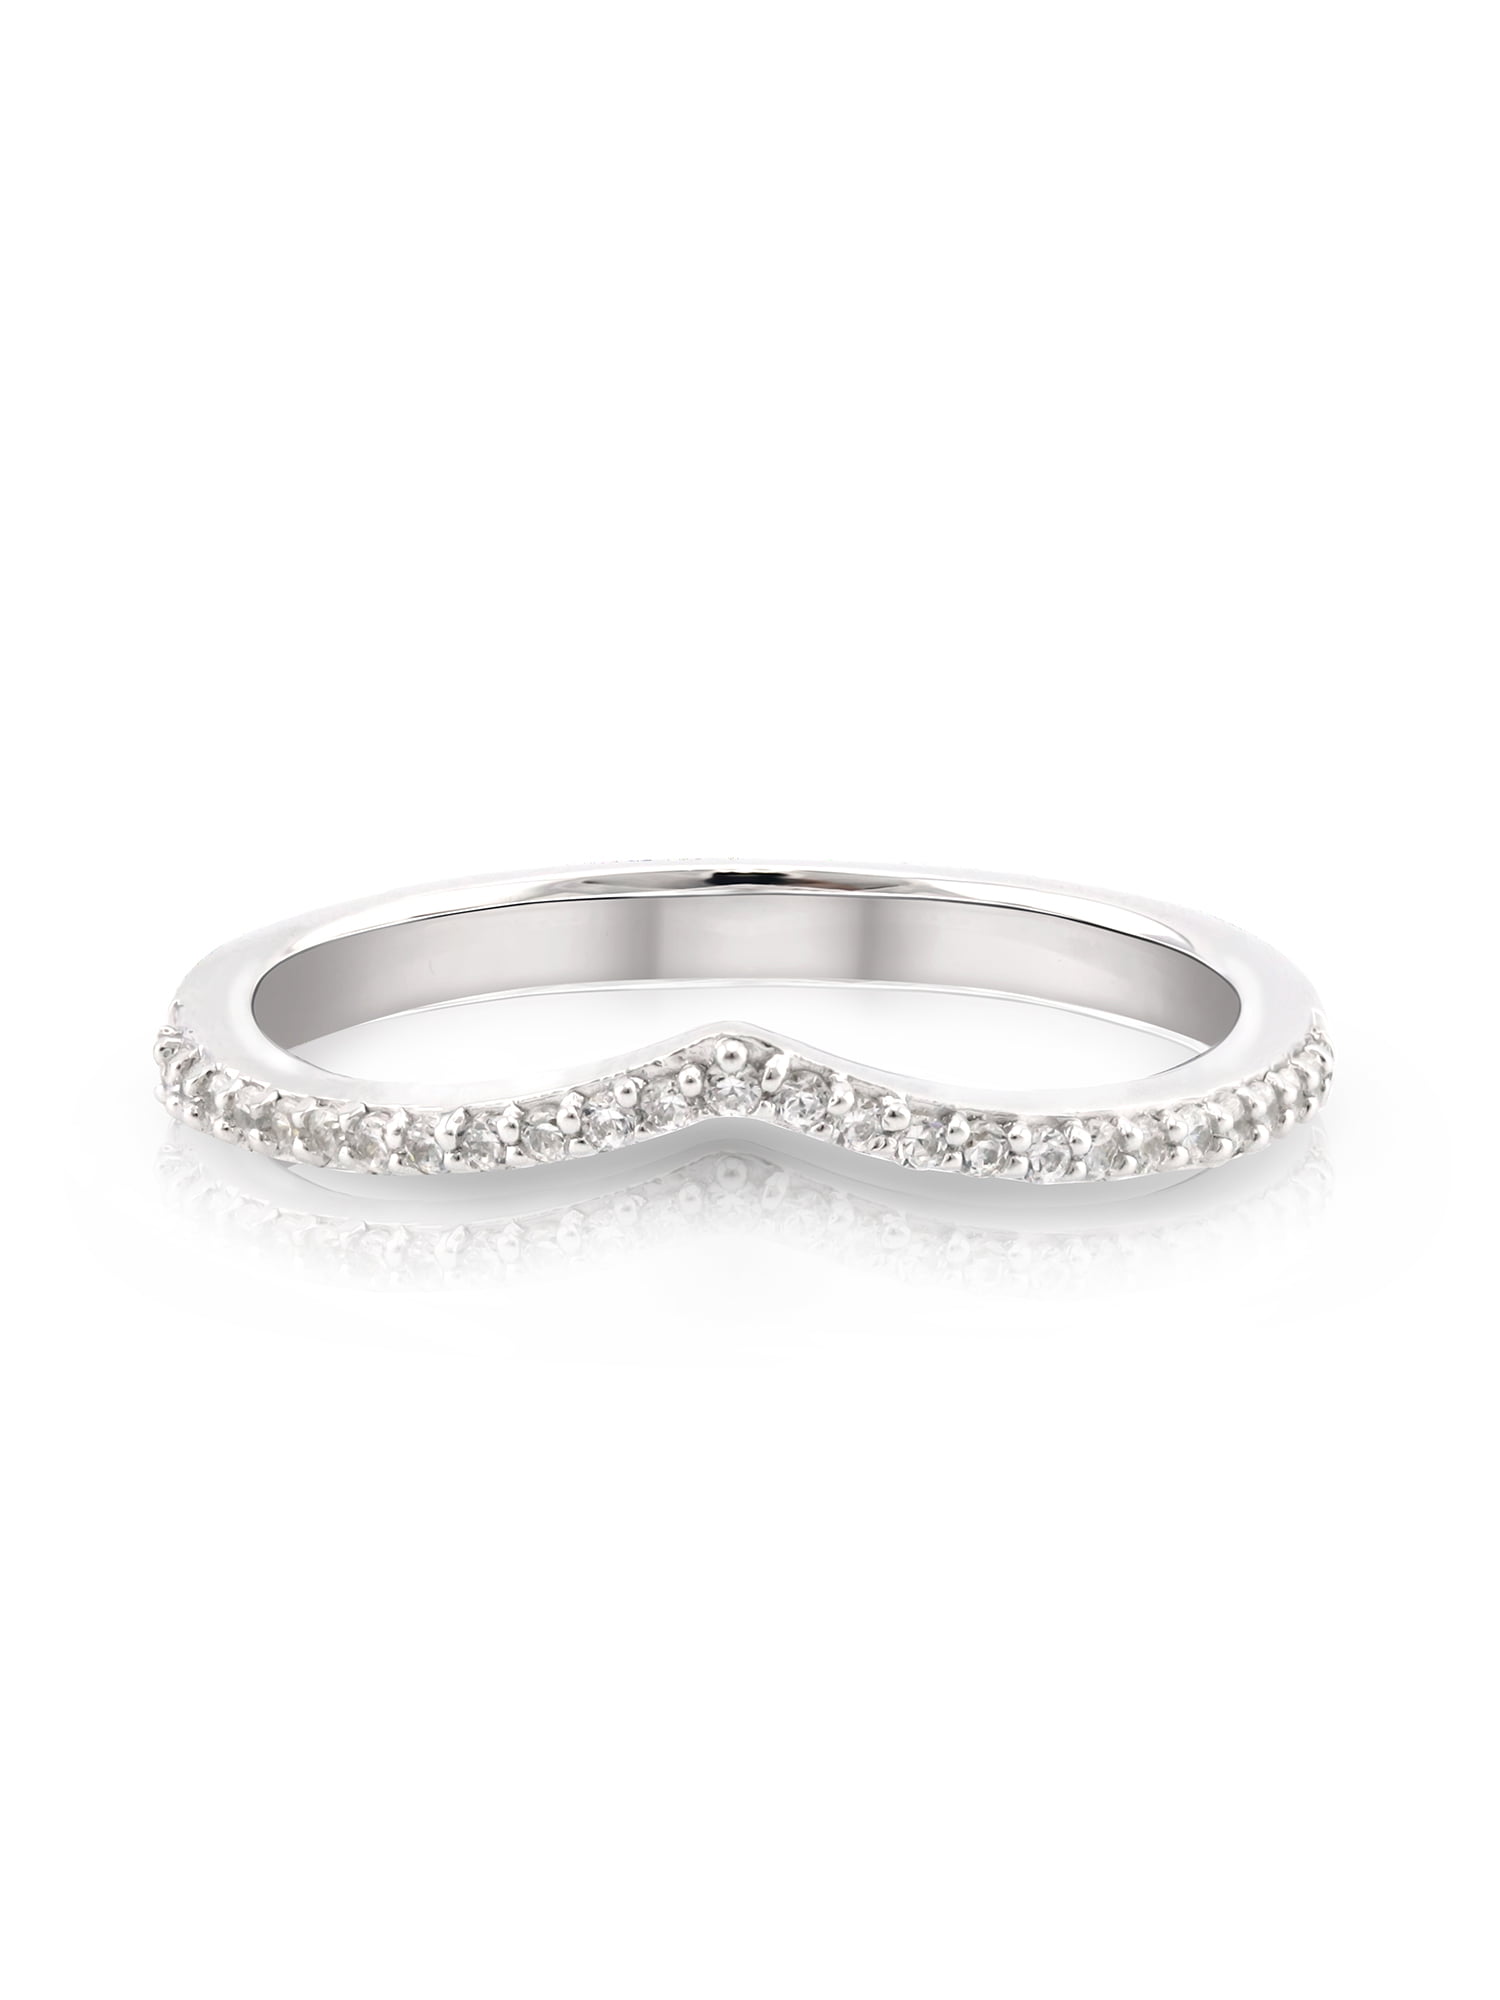 Women's Bumped Wave Eternity Cute Ring New .925 Sterling Silver Band Sizes 4-10